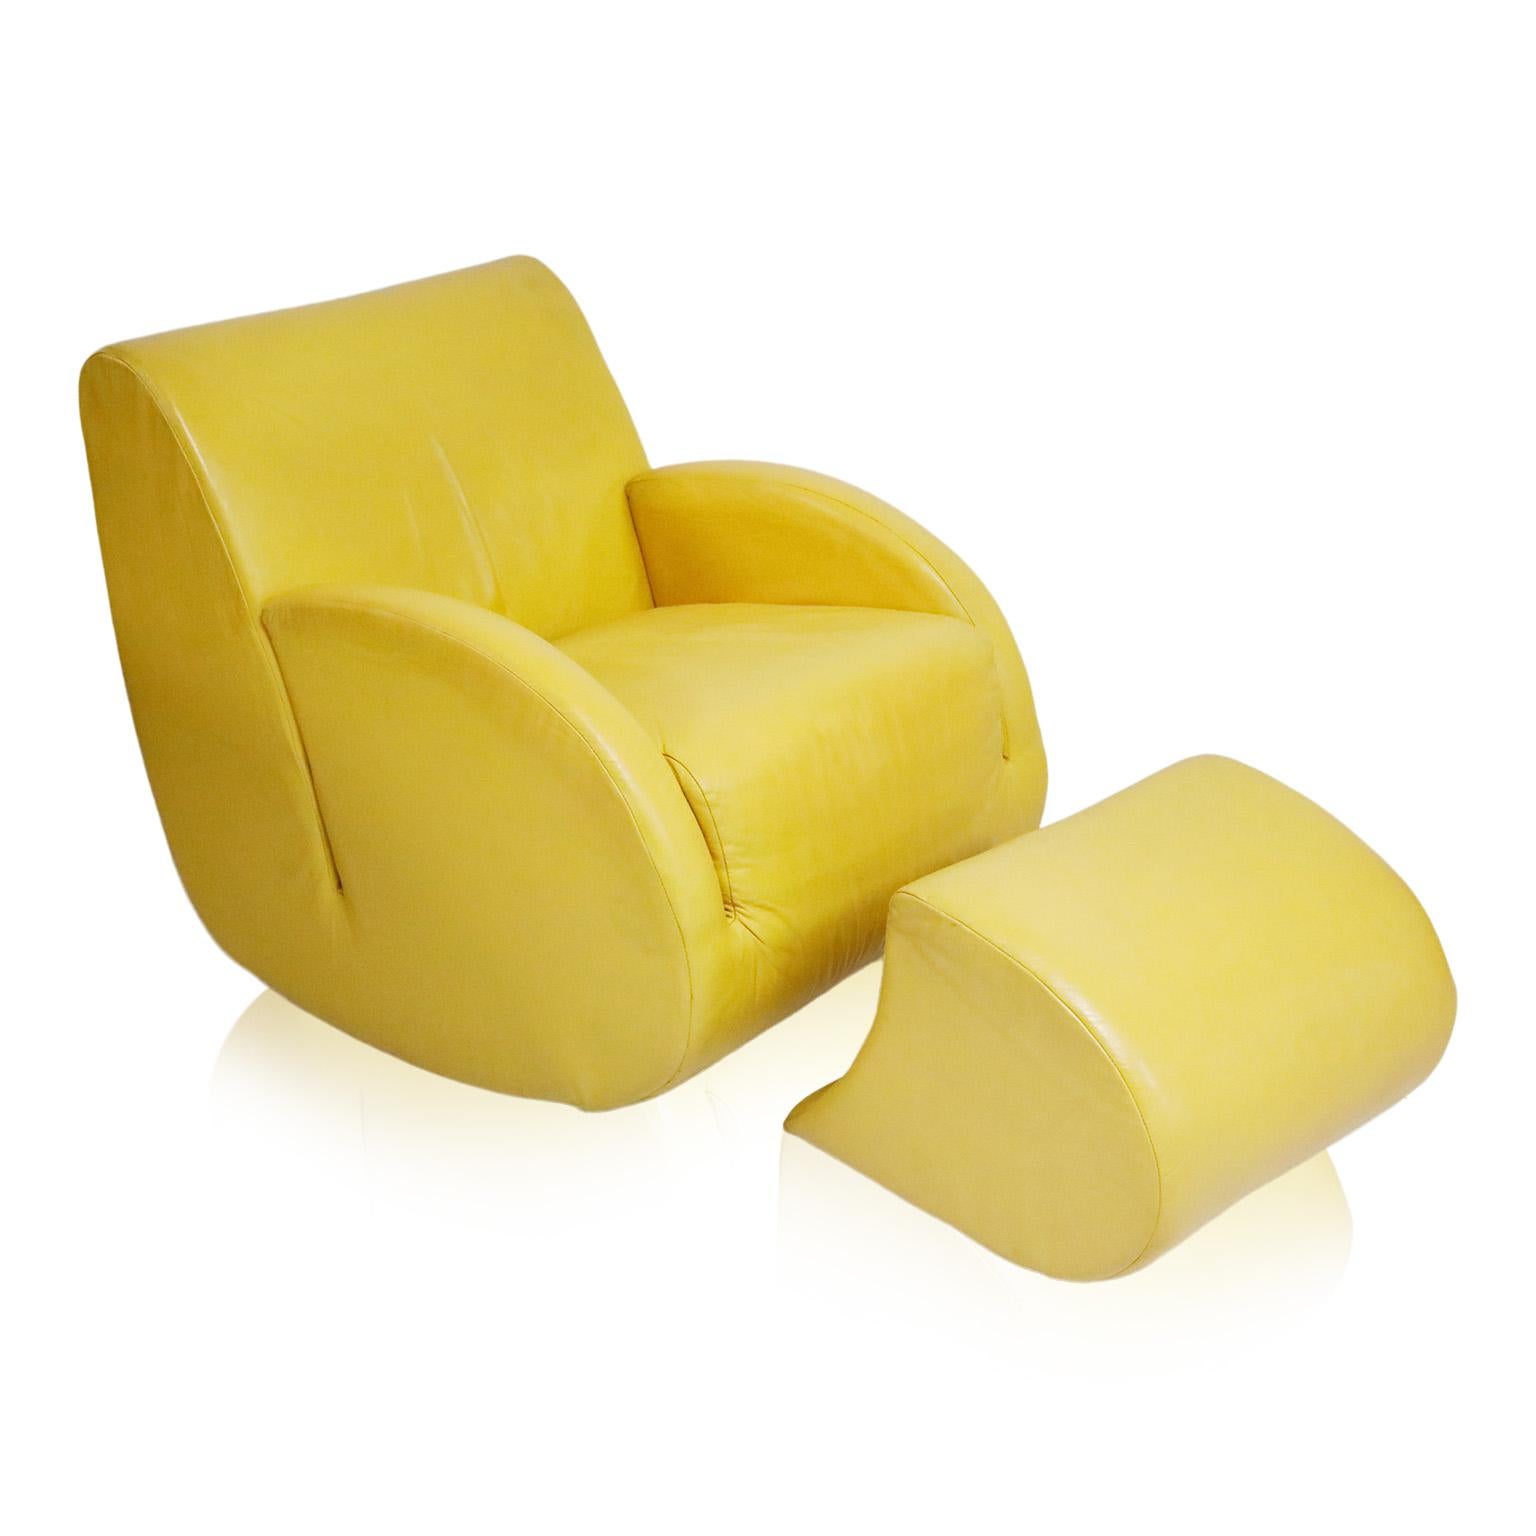 This sunflower yellow leather rocking armchair and ottoman is by Vladimir Kagan for the Kagan Collection, by American Leather. Designed in 1997 and called the 'Rock Star' lounge chair due to its rocking chair abilities cleverly disguised underneath